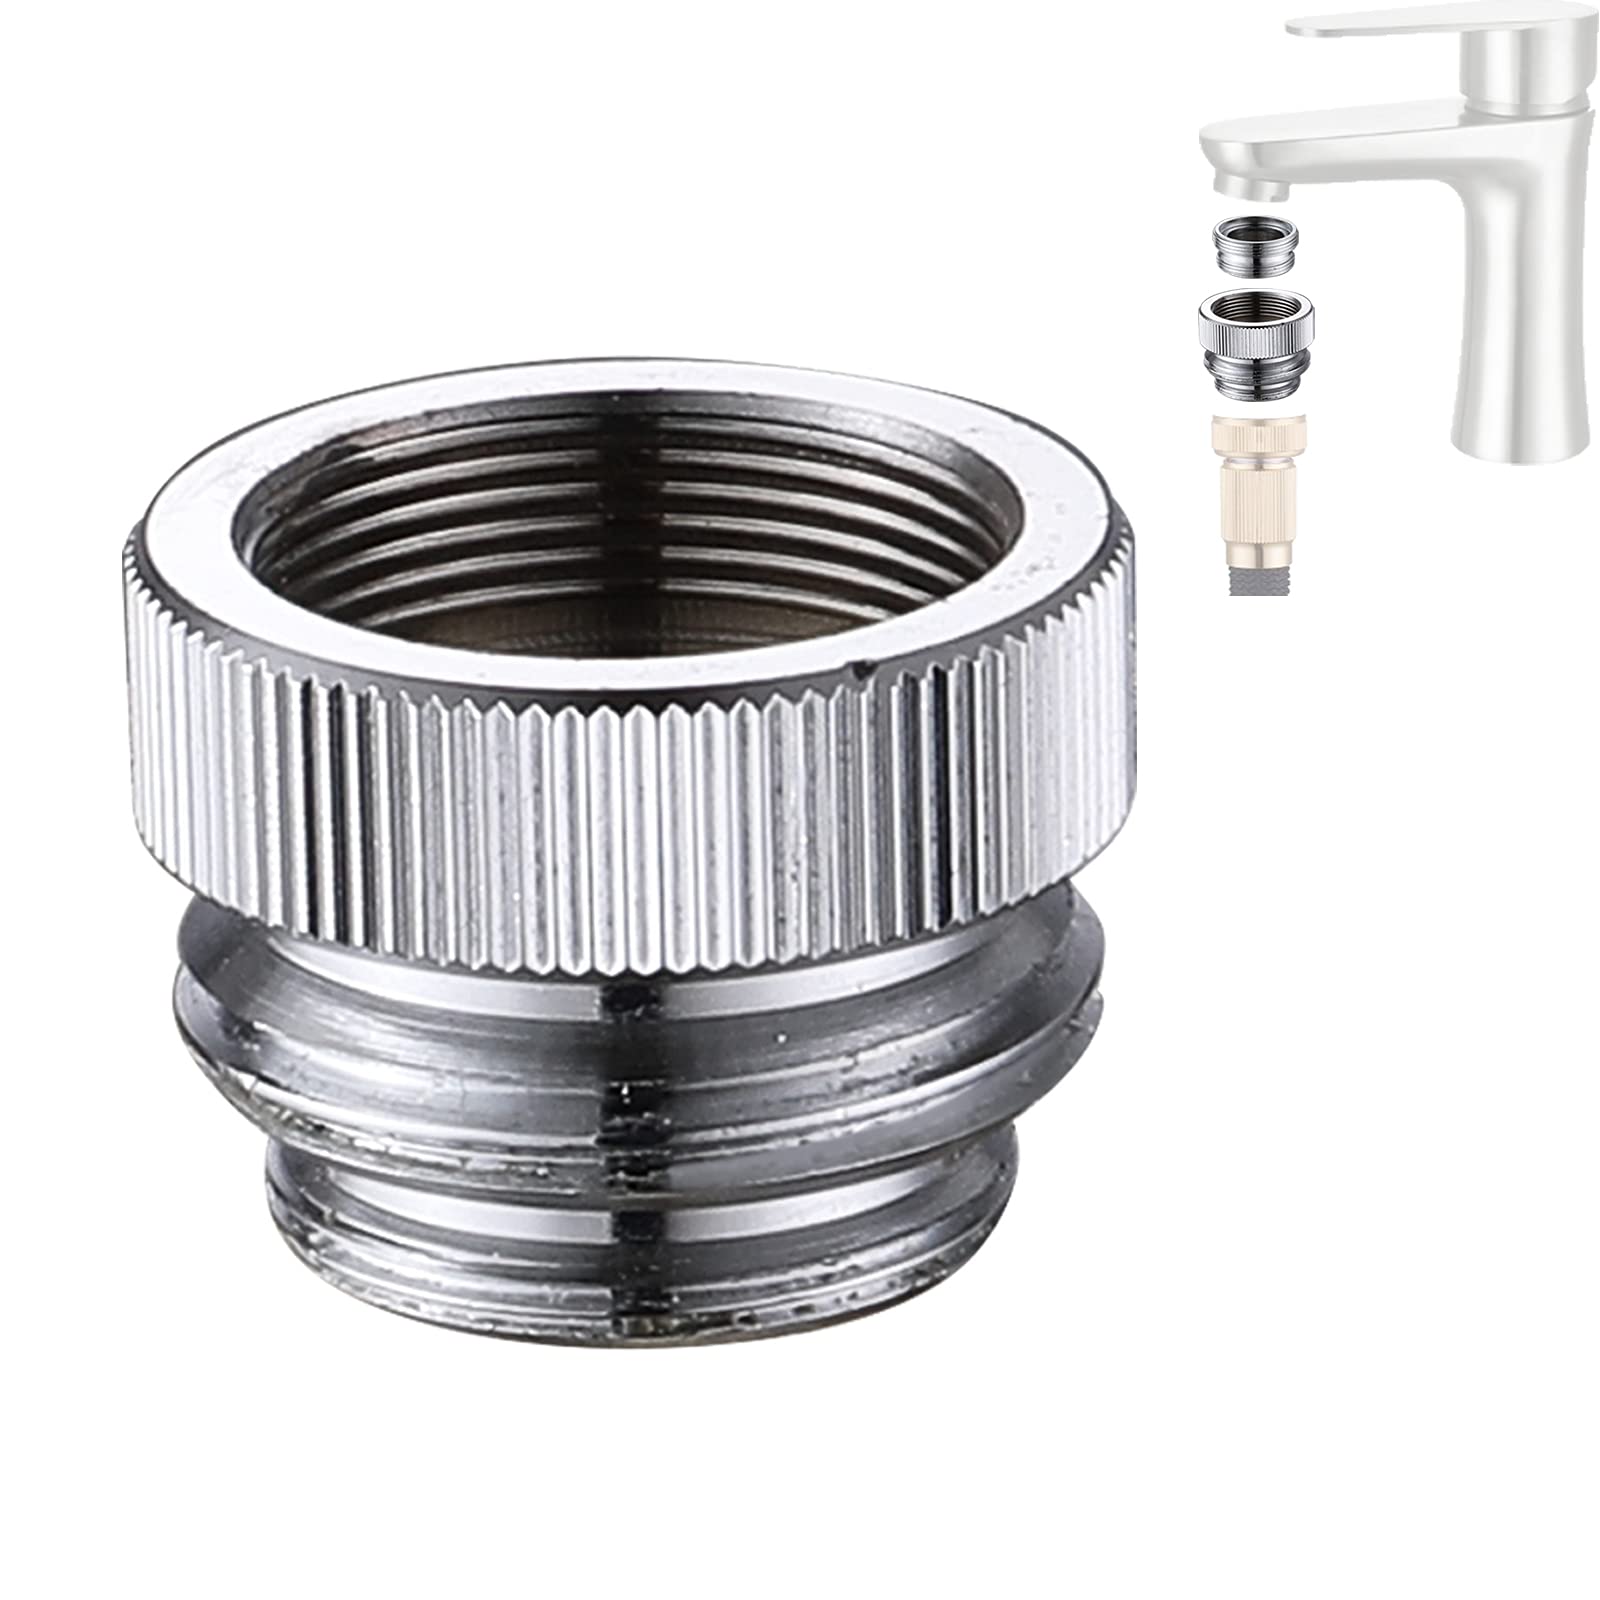 Faucet Adapter Connects Garden Hose or Other 3/4'' Thread Hose, Leakproof  Brass Kitchen Sink Aerator: Quick to Connect (Chrome) NewNest Australia